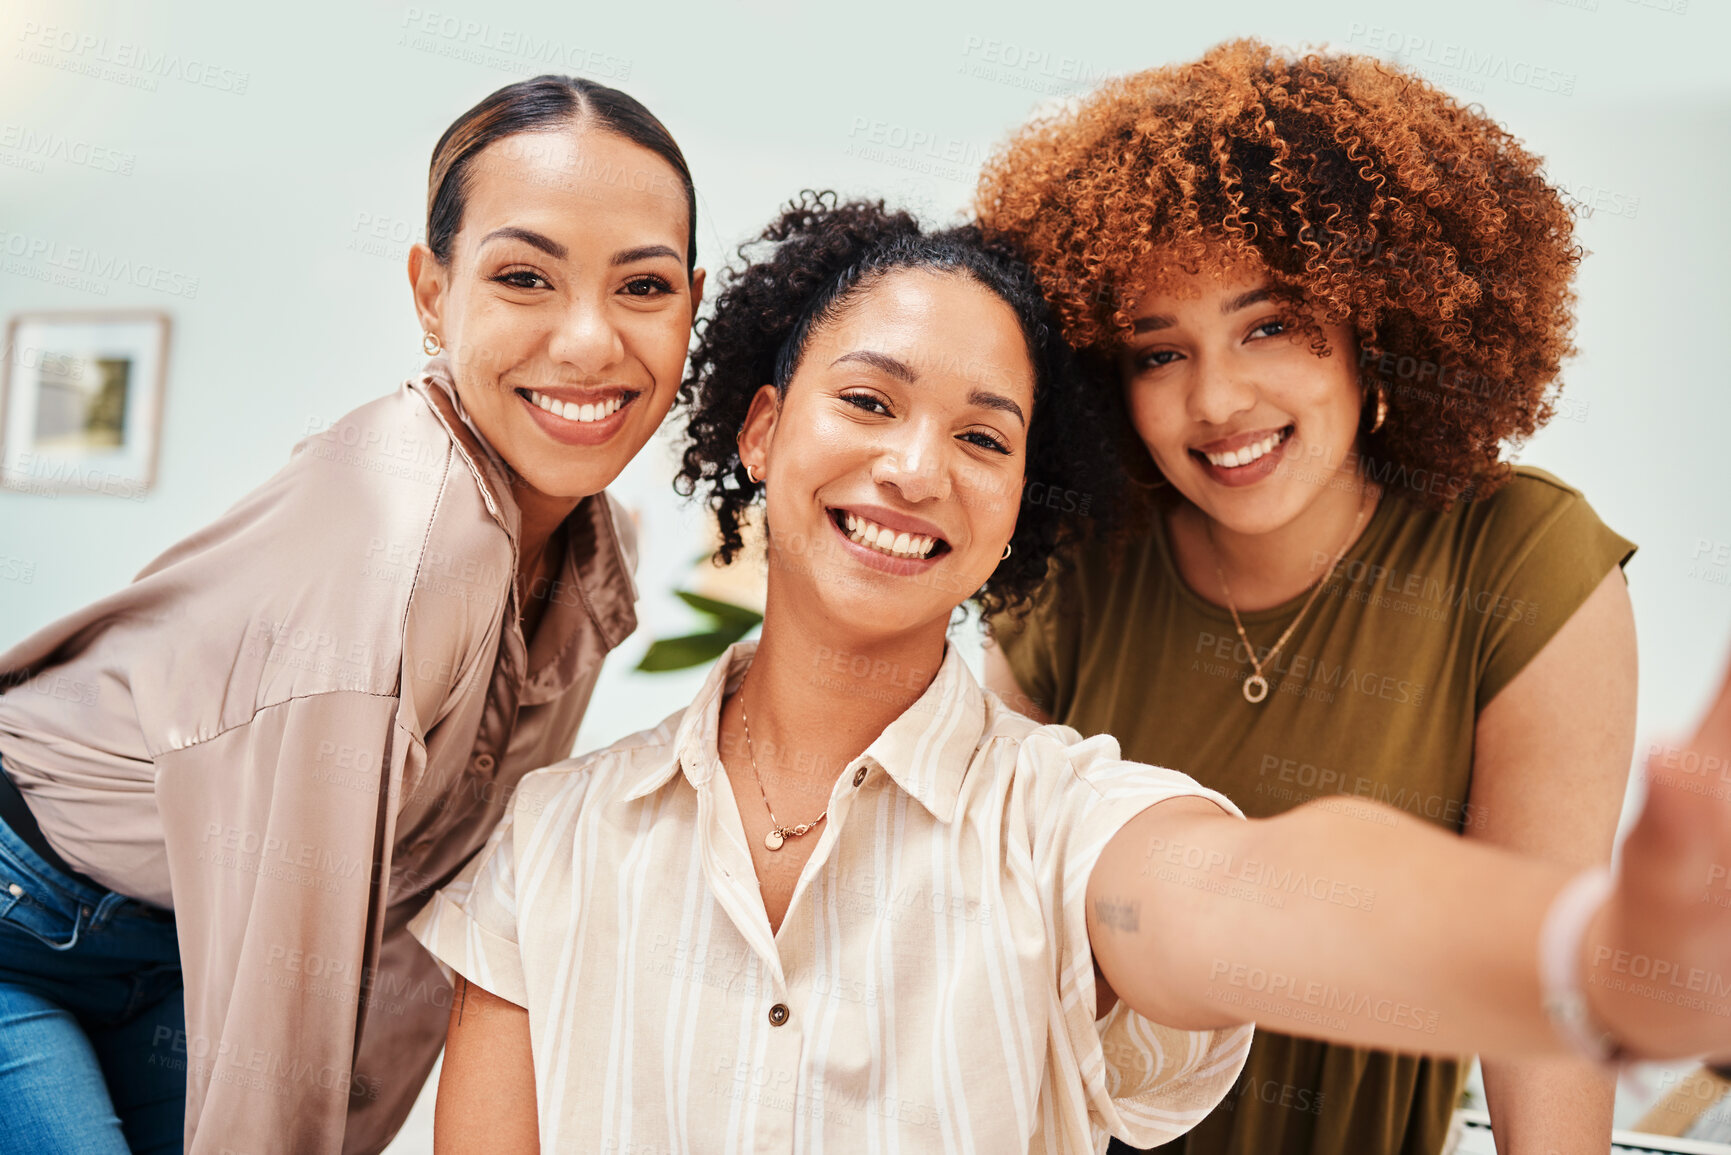 Buy stock photo Selfie, fashion designer or portrait of women taking a photograph together for teamwork on break. Workplace, smile or excited group of happy employees in a picture for a social media memory or post